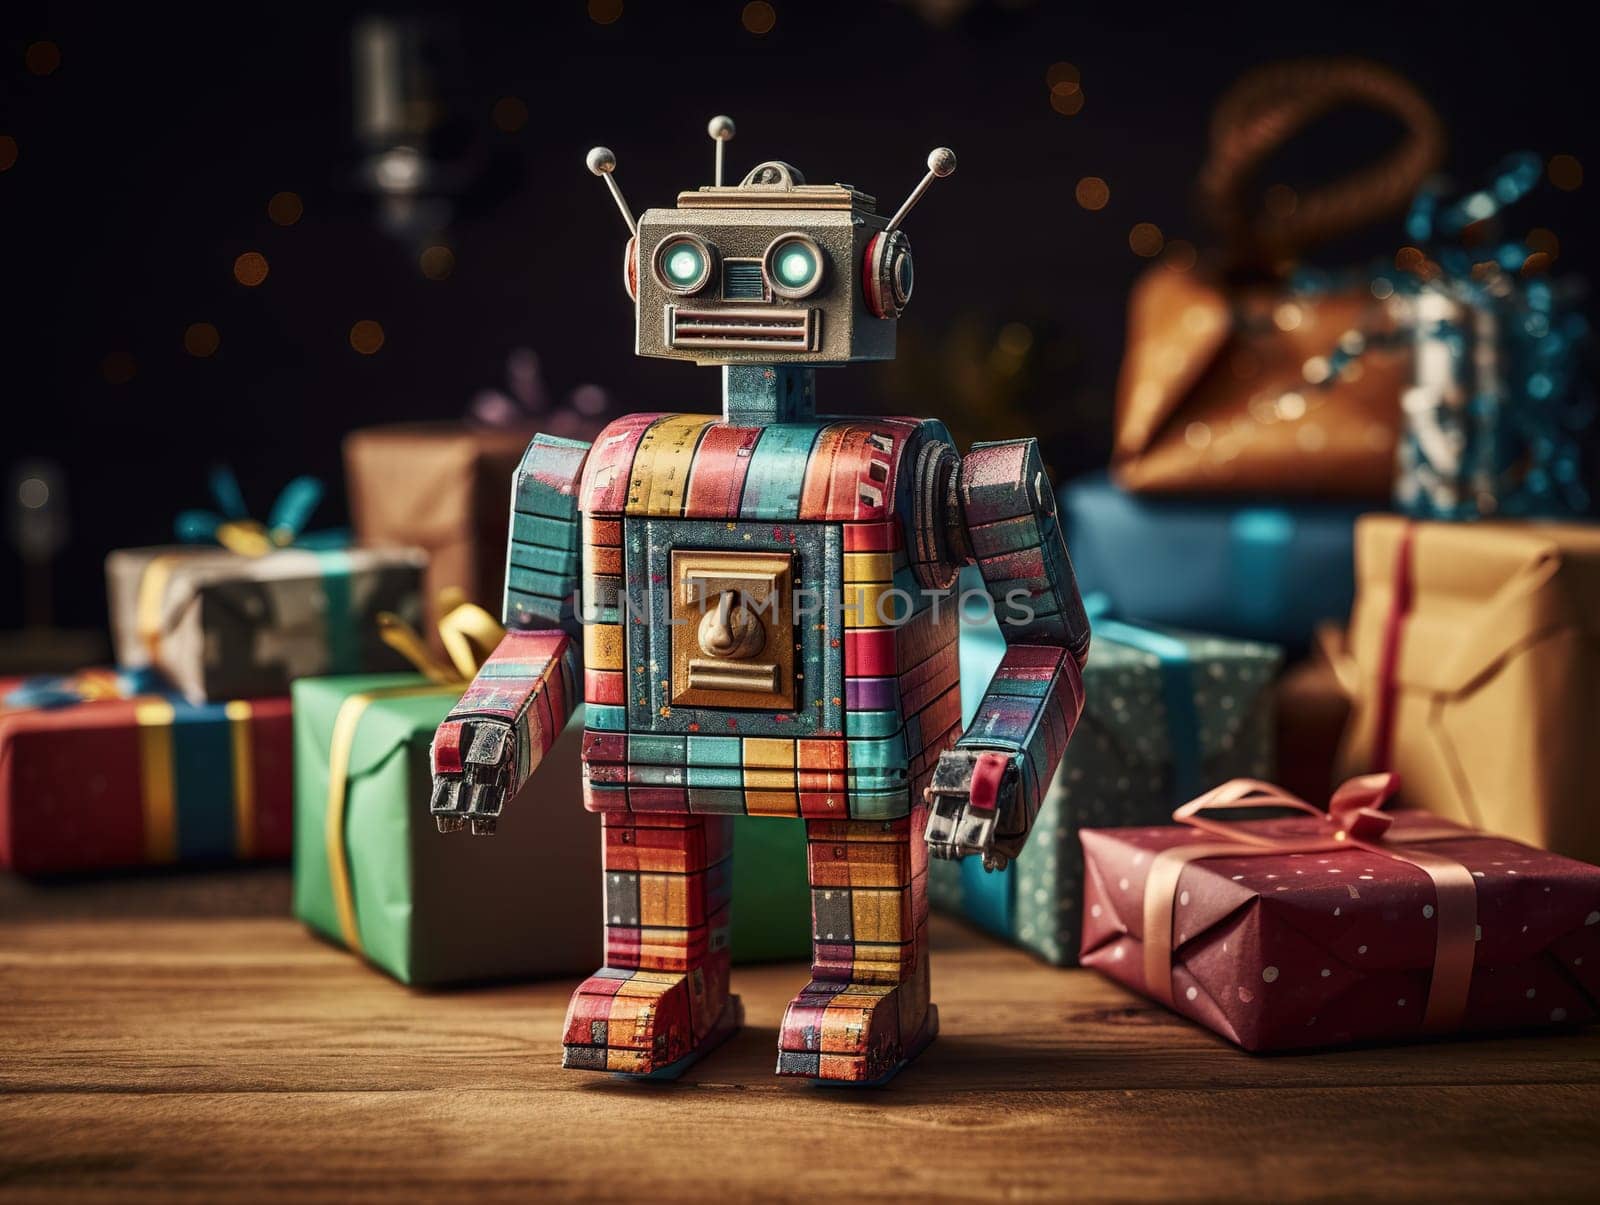 Illustration Of A Vintage, Colorful Robot Surrounded By Christmas Presents